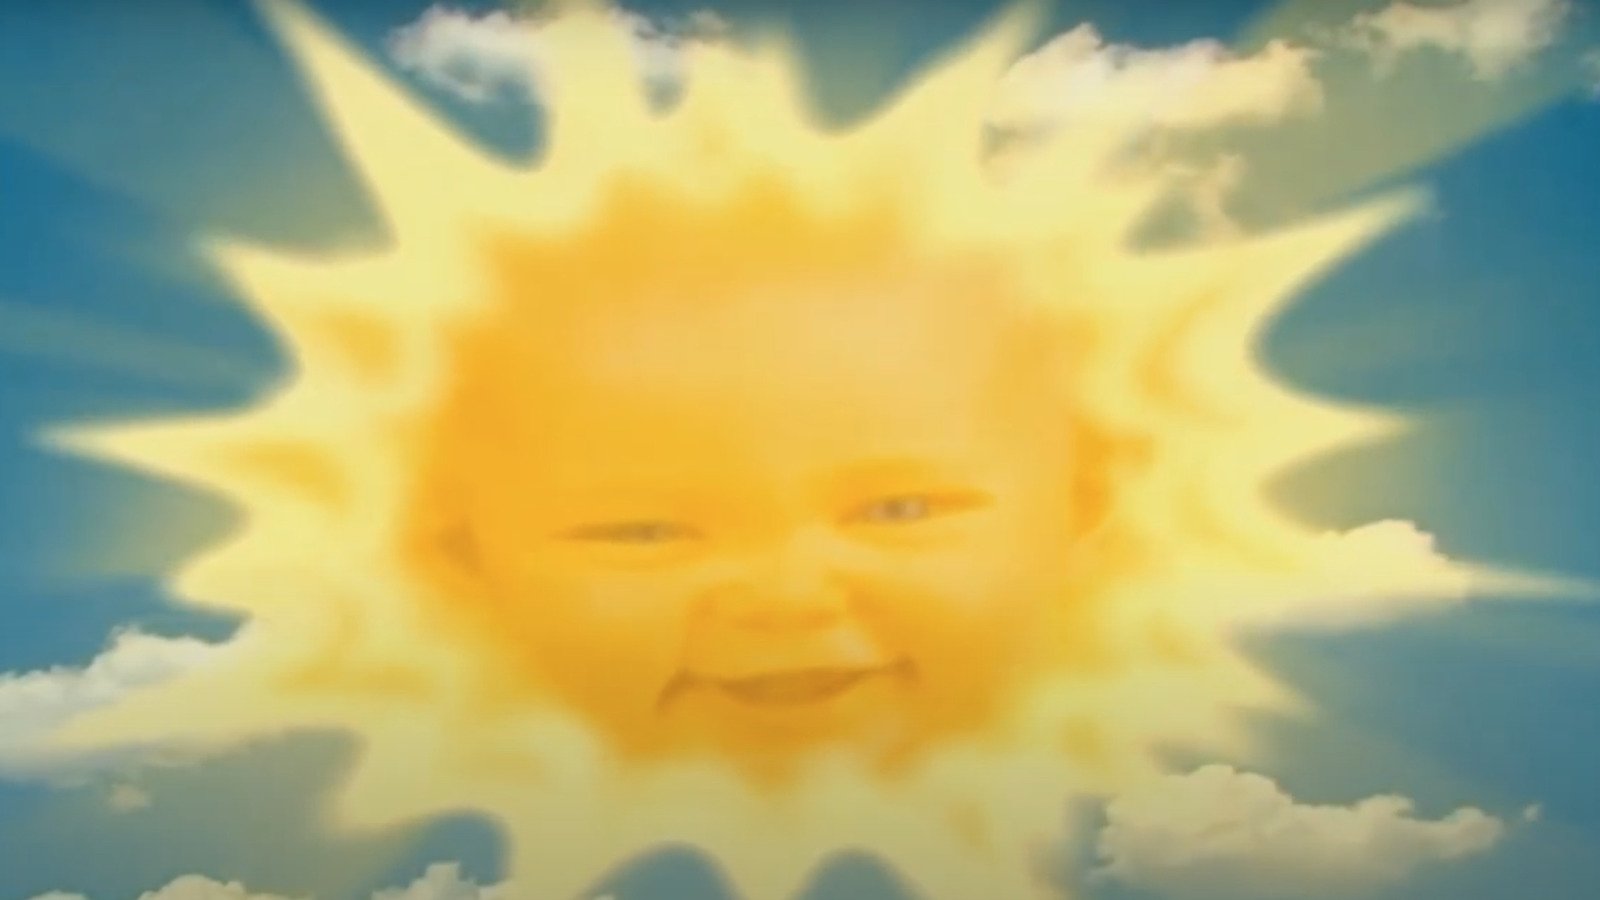 Sun Baby From Teletubbies Grew Up To Be Gorgeous